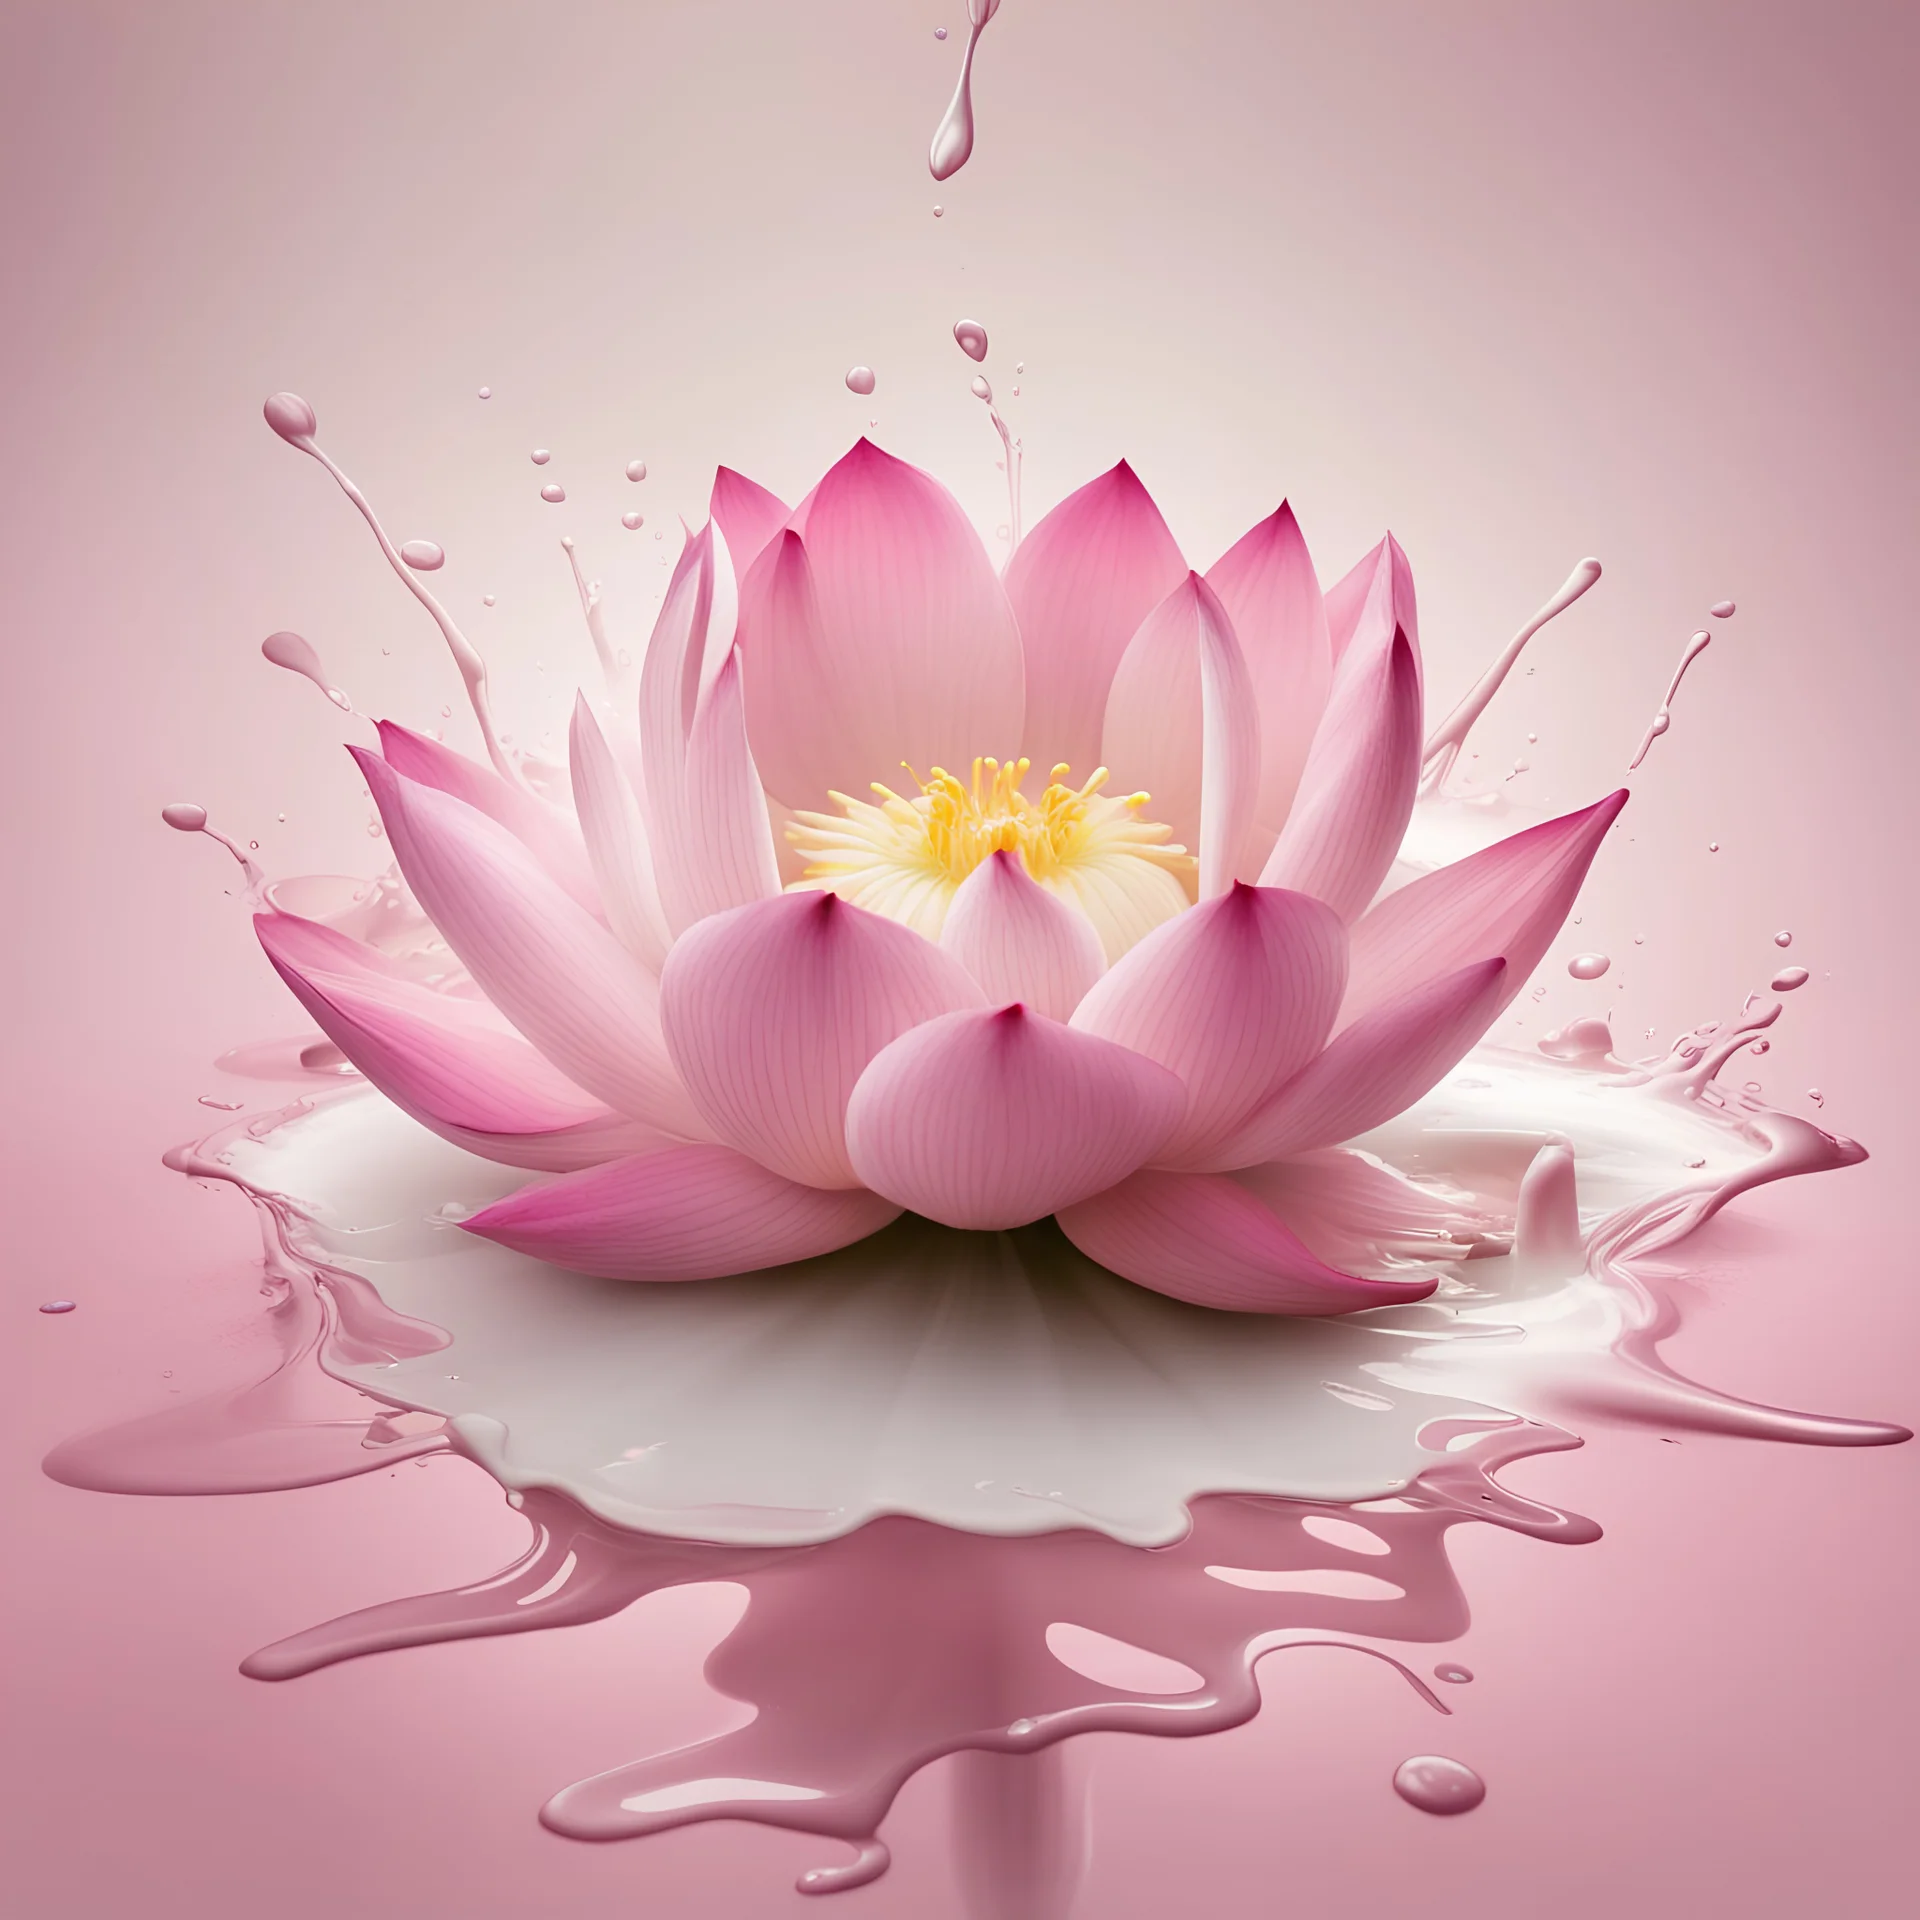 A beautiful pink lotus flower dropped into the creamy texture of a splash of milk